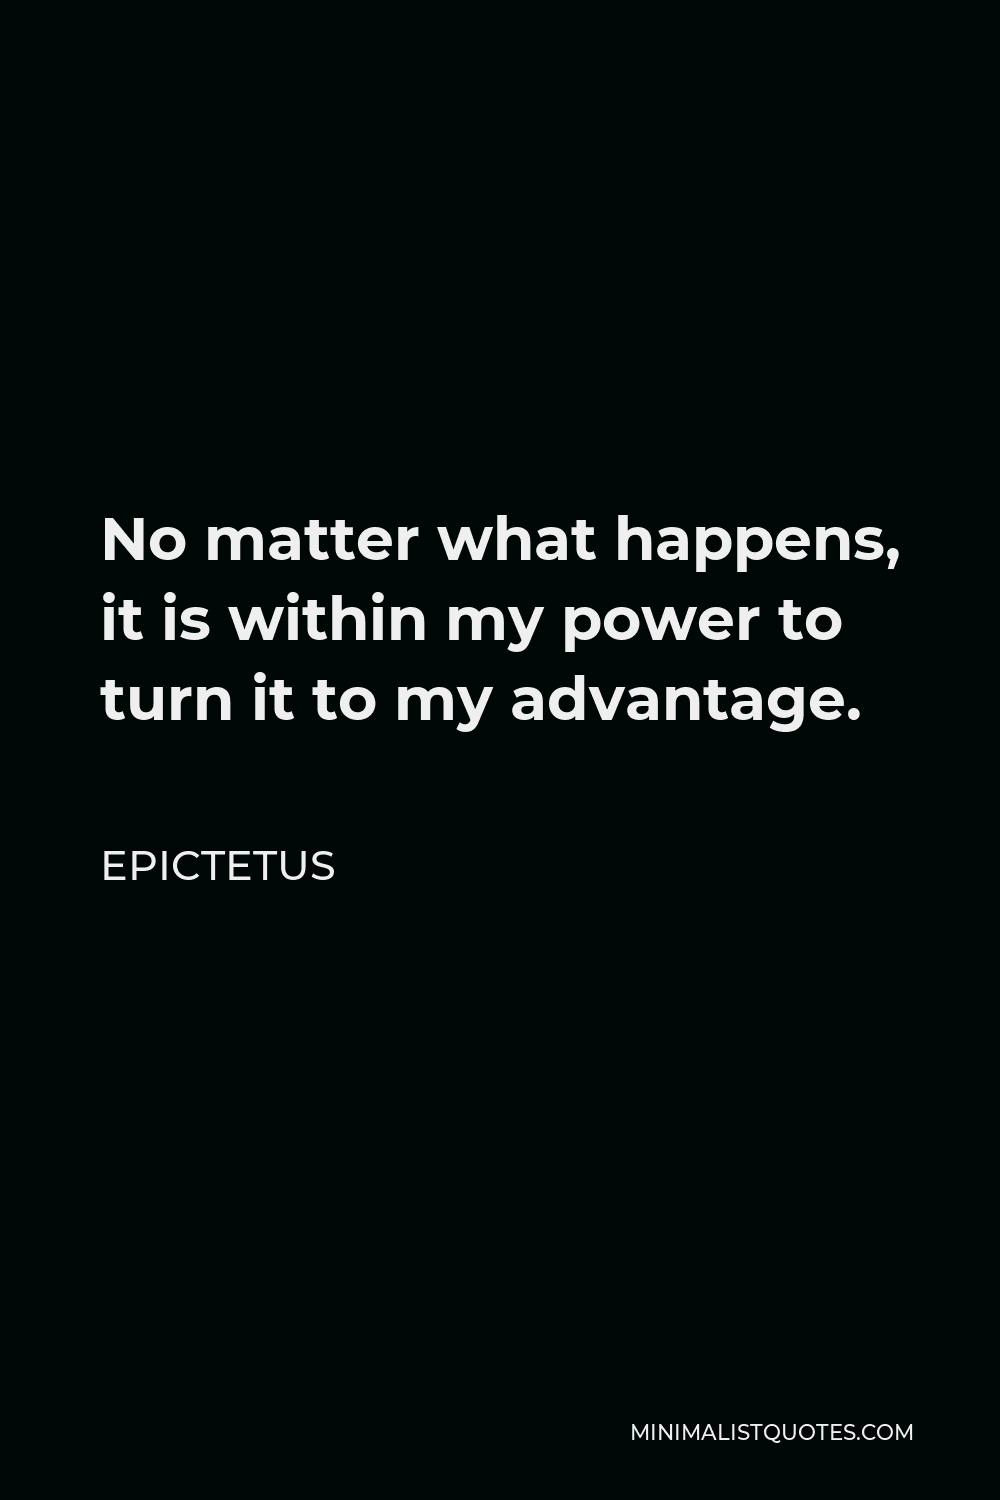 Epictetus Quote No Matter What Happens It Is Within My Power To Turn It To My Advantage